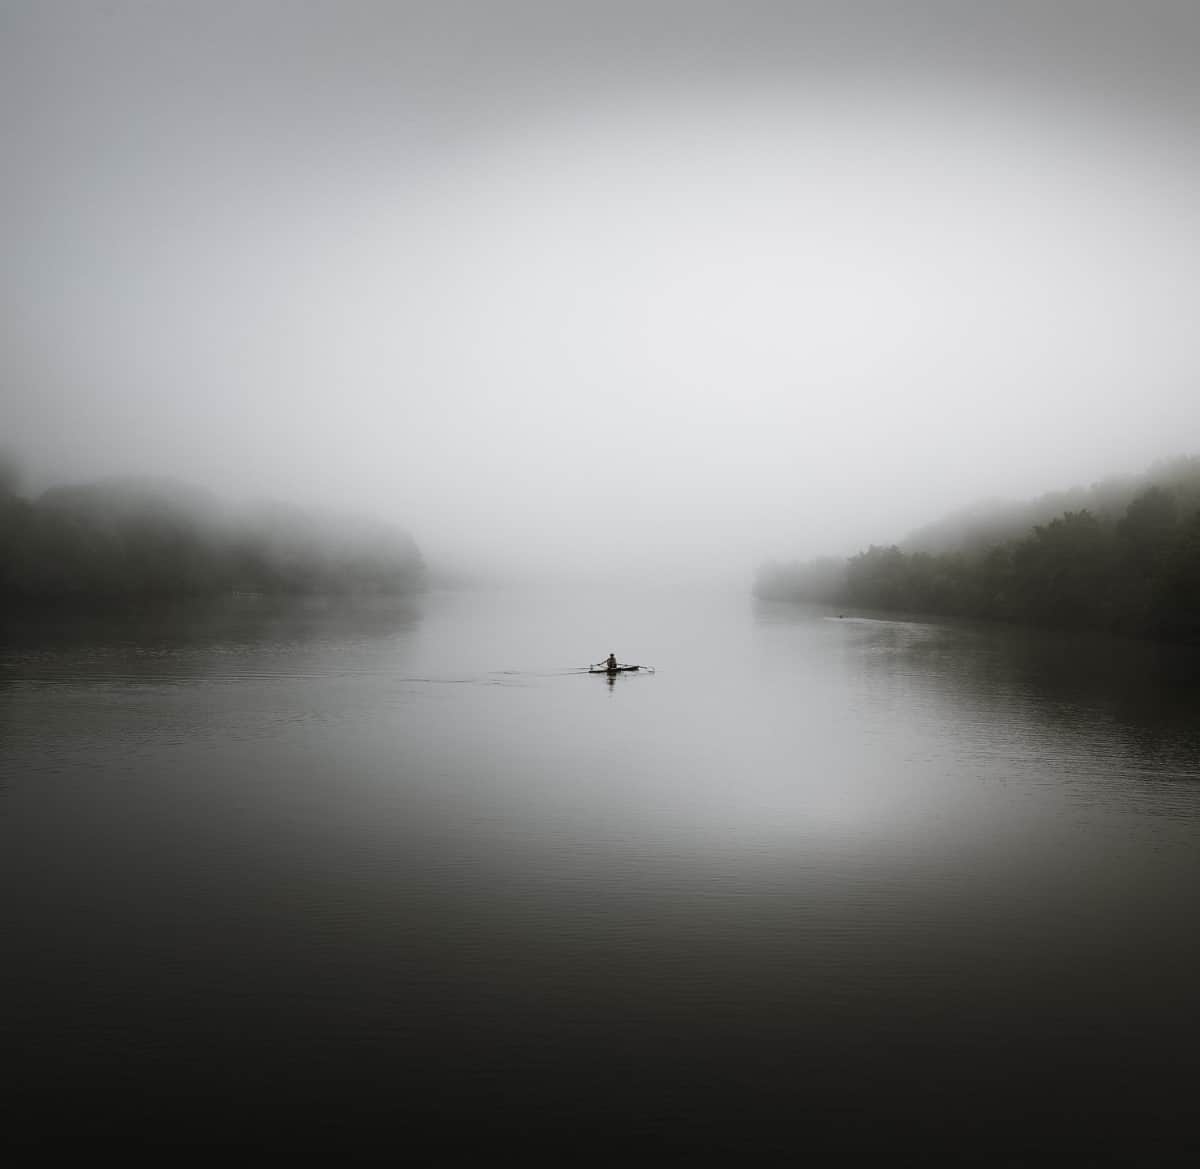 Black and white photo of person rowing a boat in the middle of a lake